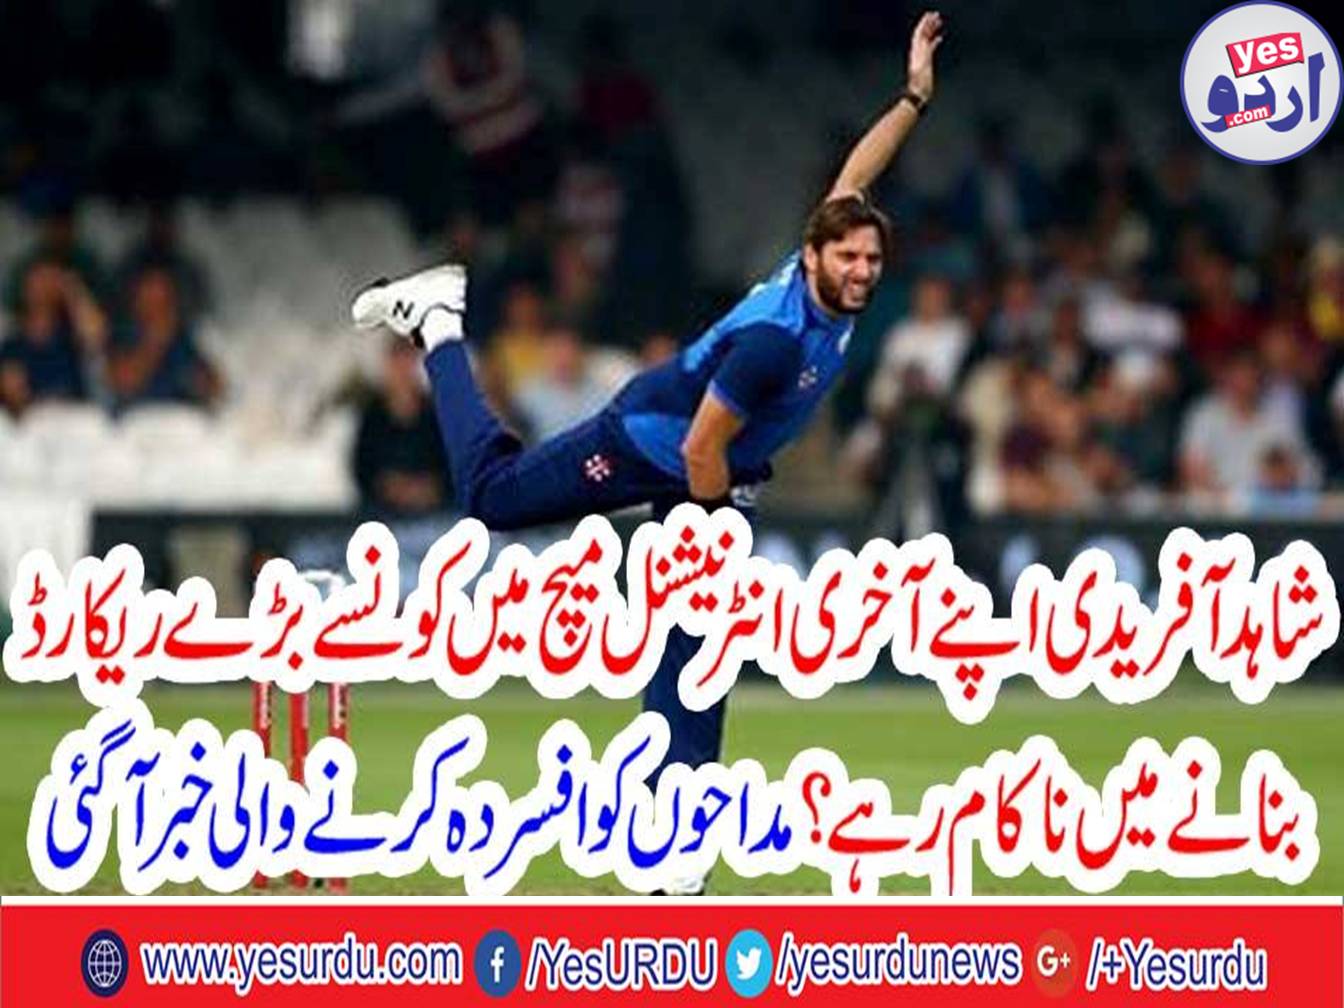 How Shahid Afridi failed to name his greatest honor in his last international match?